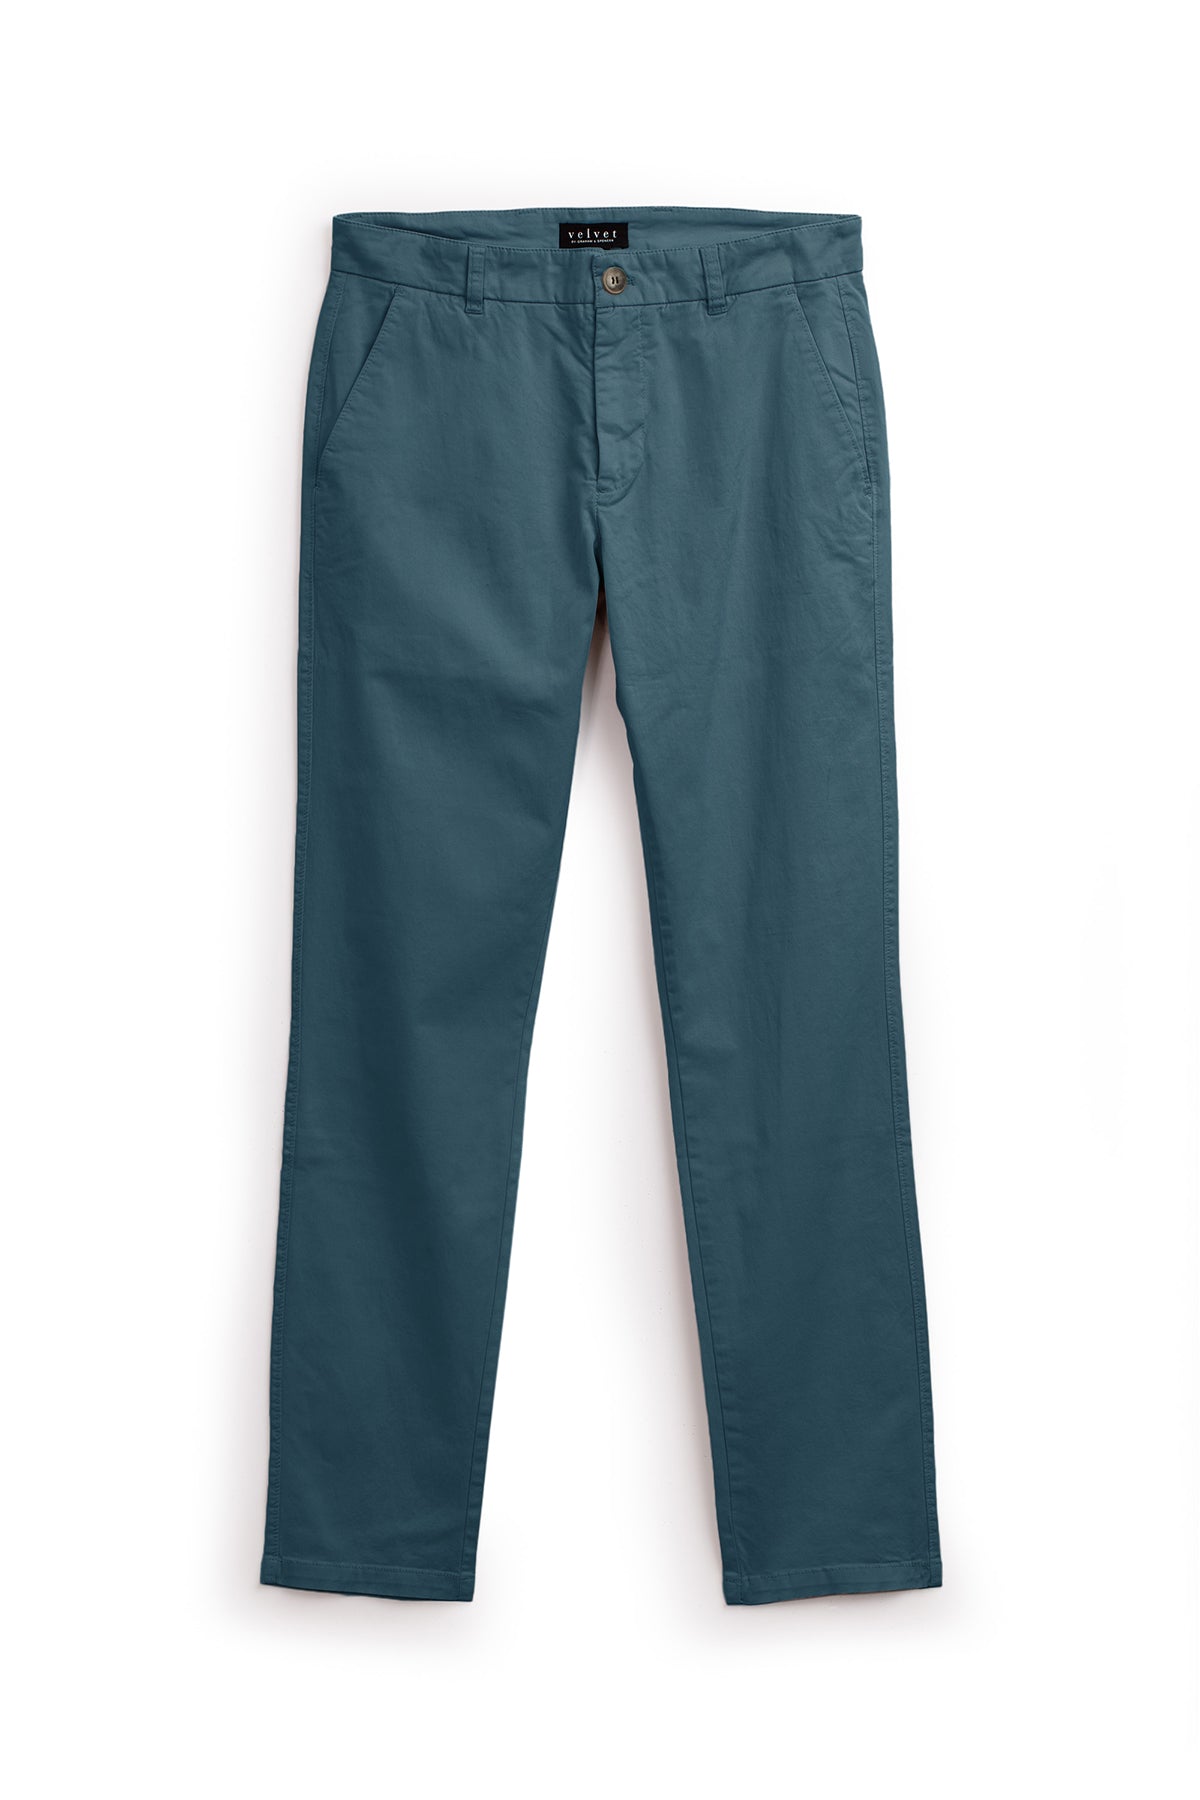   A weekend men's BROGAN COTTON TWILL PANT by Velvet by Graham & Spencer on a white background. 